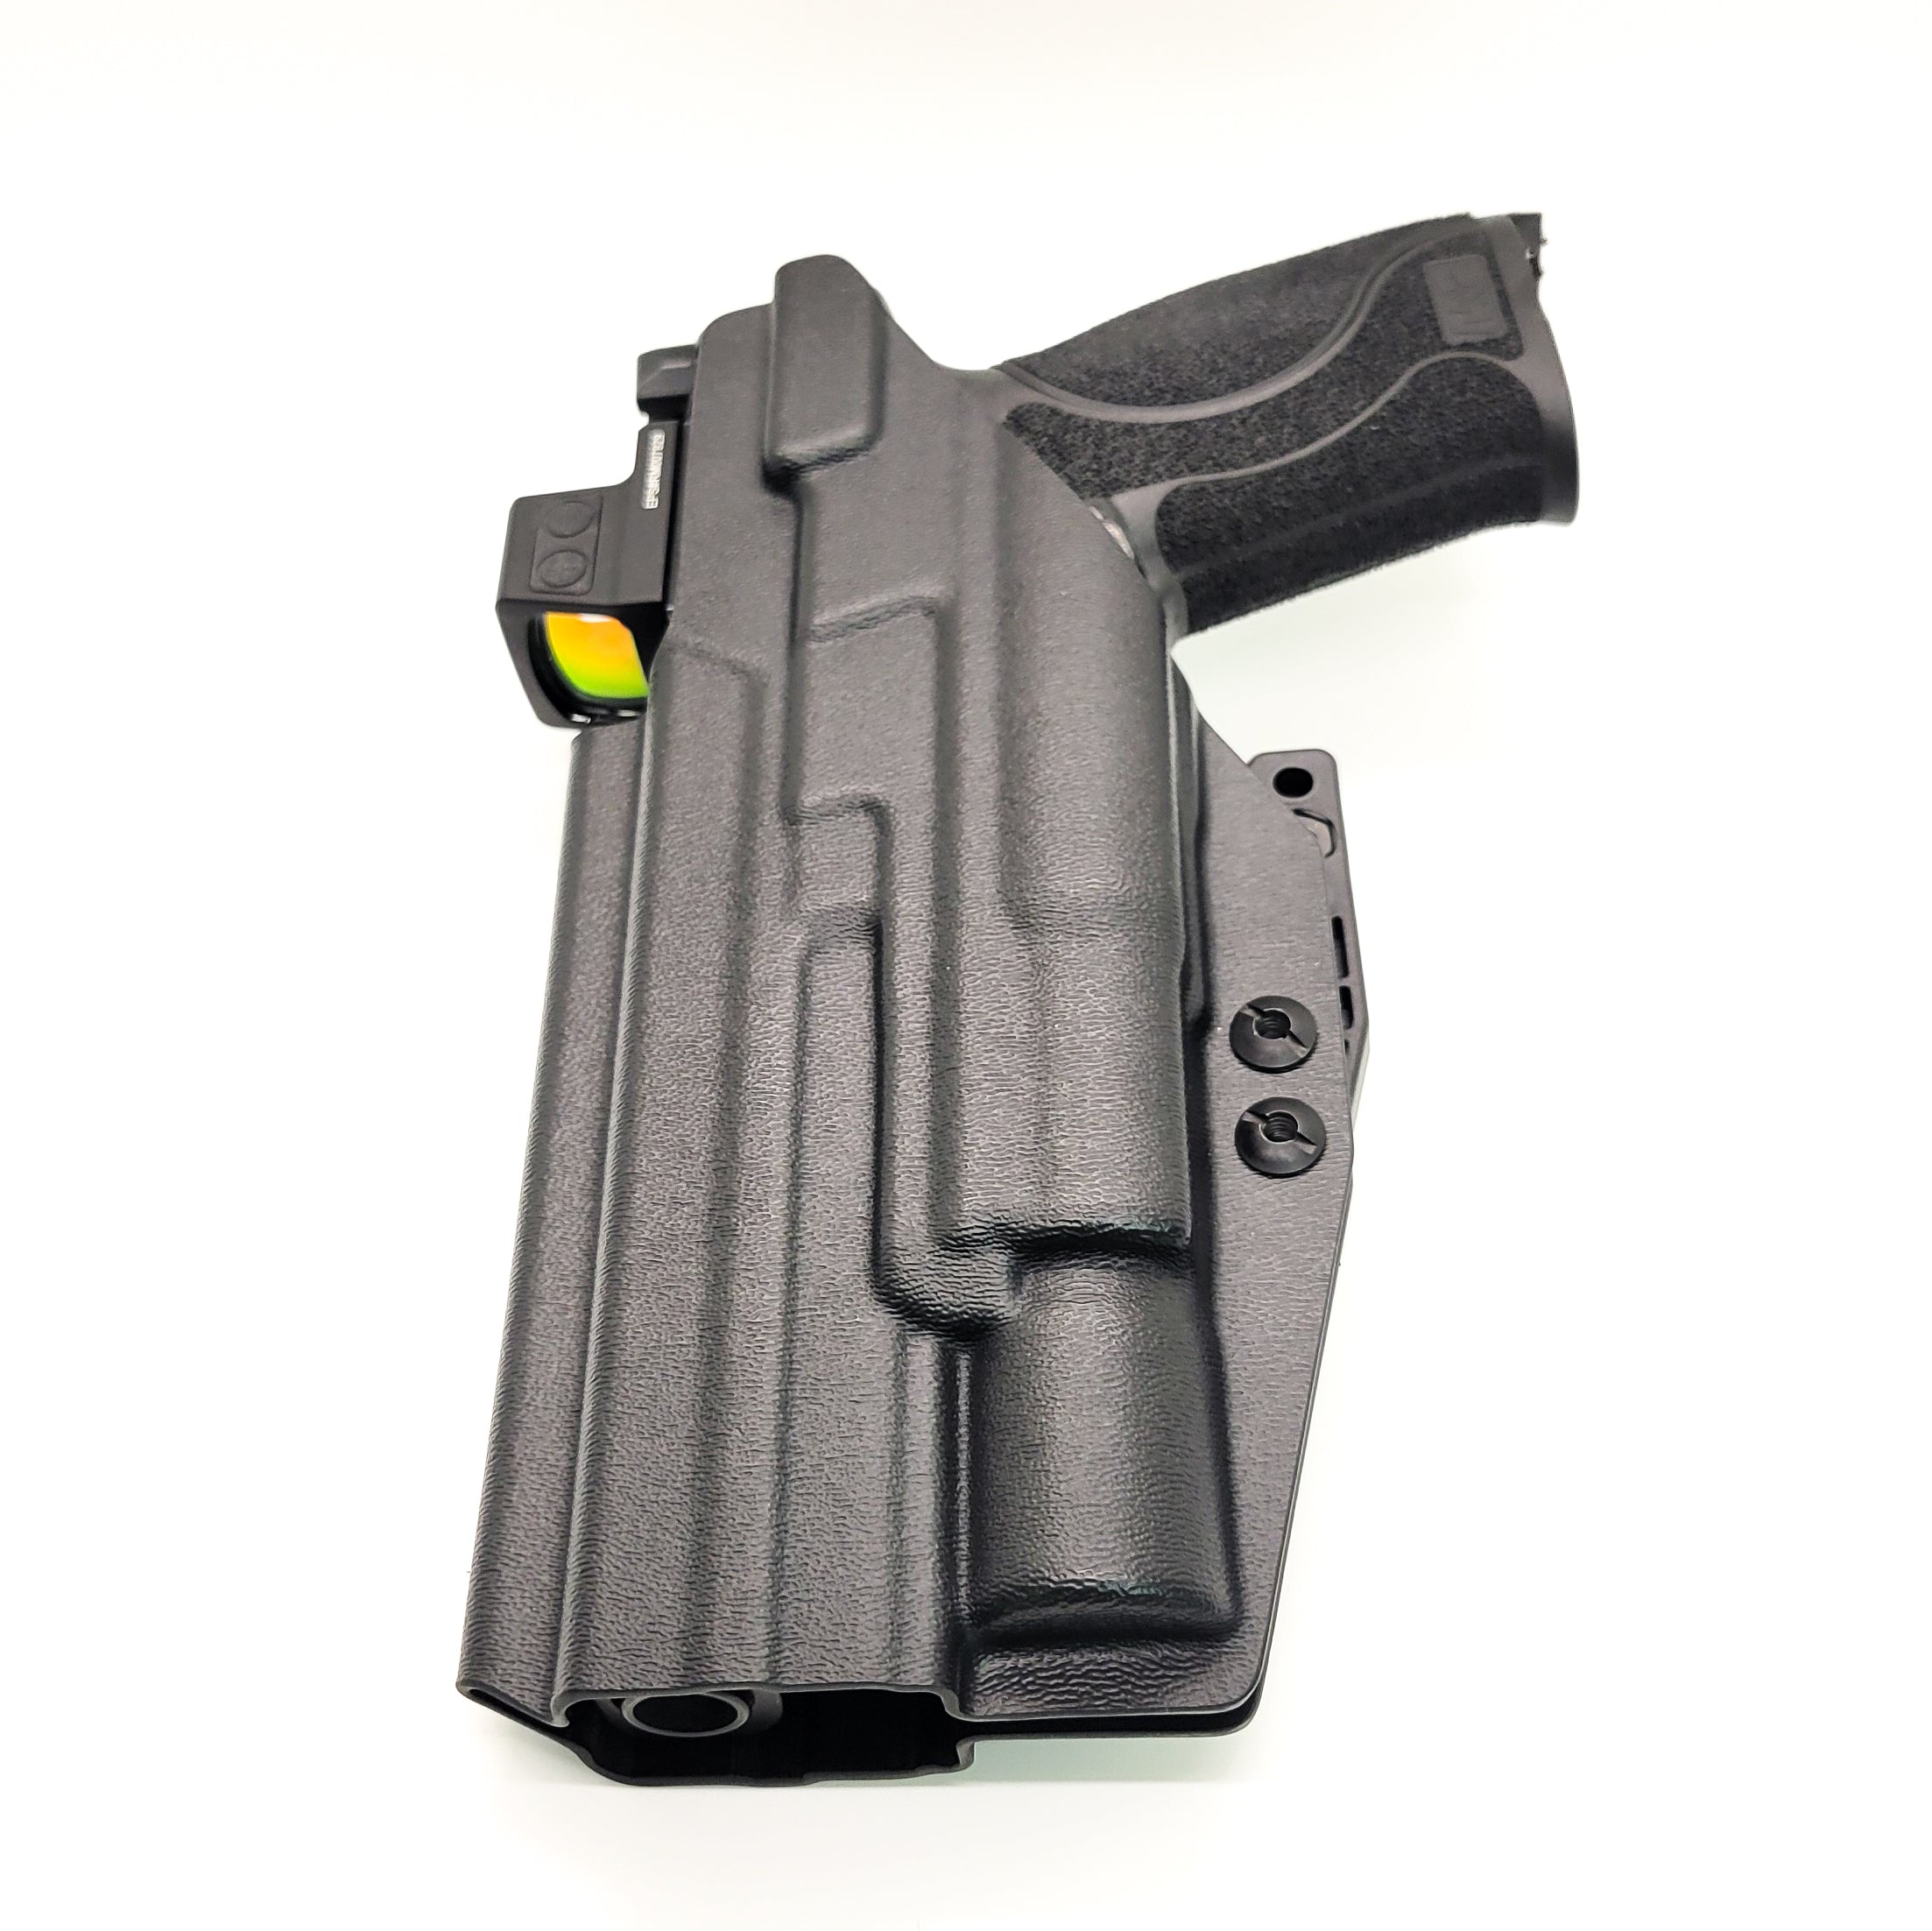 For the best Inside Waistband IWB AIWB Holster designed to fit the Smith and Wesson M&P 10MM 5.6" Performance Center M2.0 pistol with thumb safety & Surefire X300U-A, X300U-B, X-300T-A, or X-300T-B weapon light, shop four brothers. Full sweat guard, adjustable retention, cleared for a red dot sight. Made in the USA.